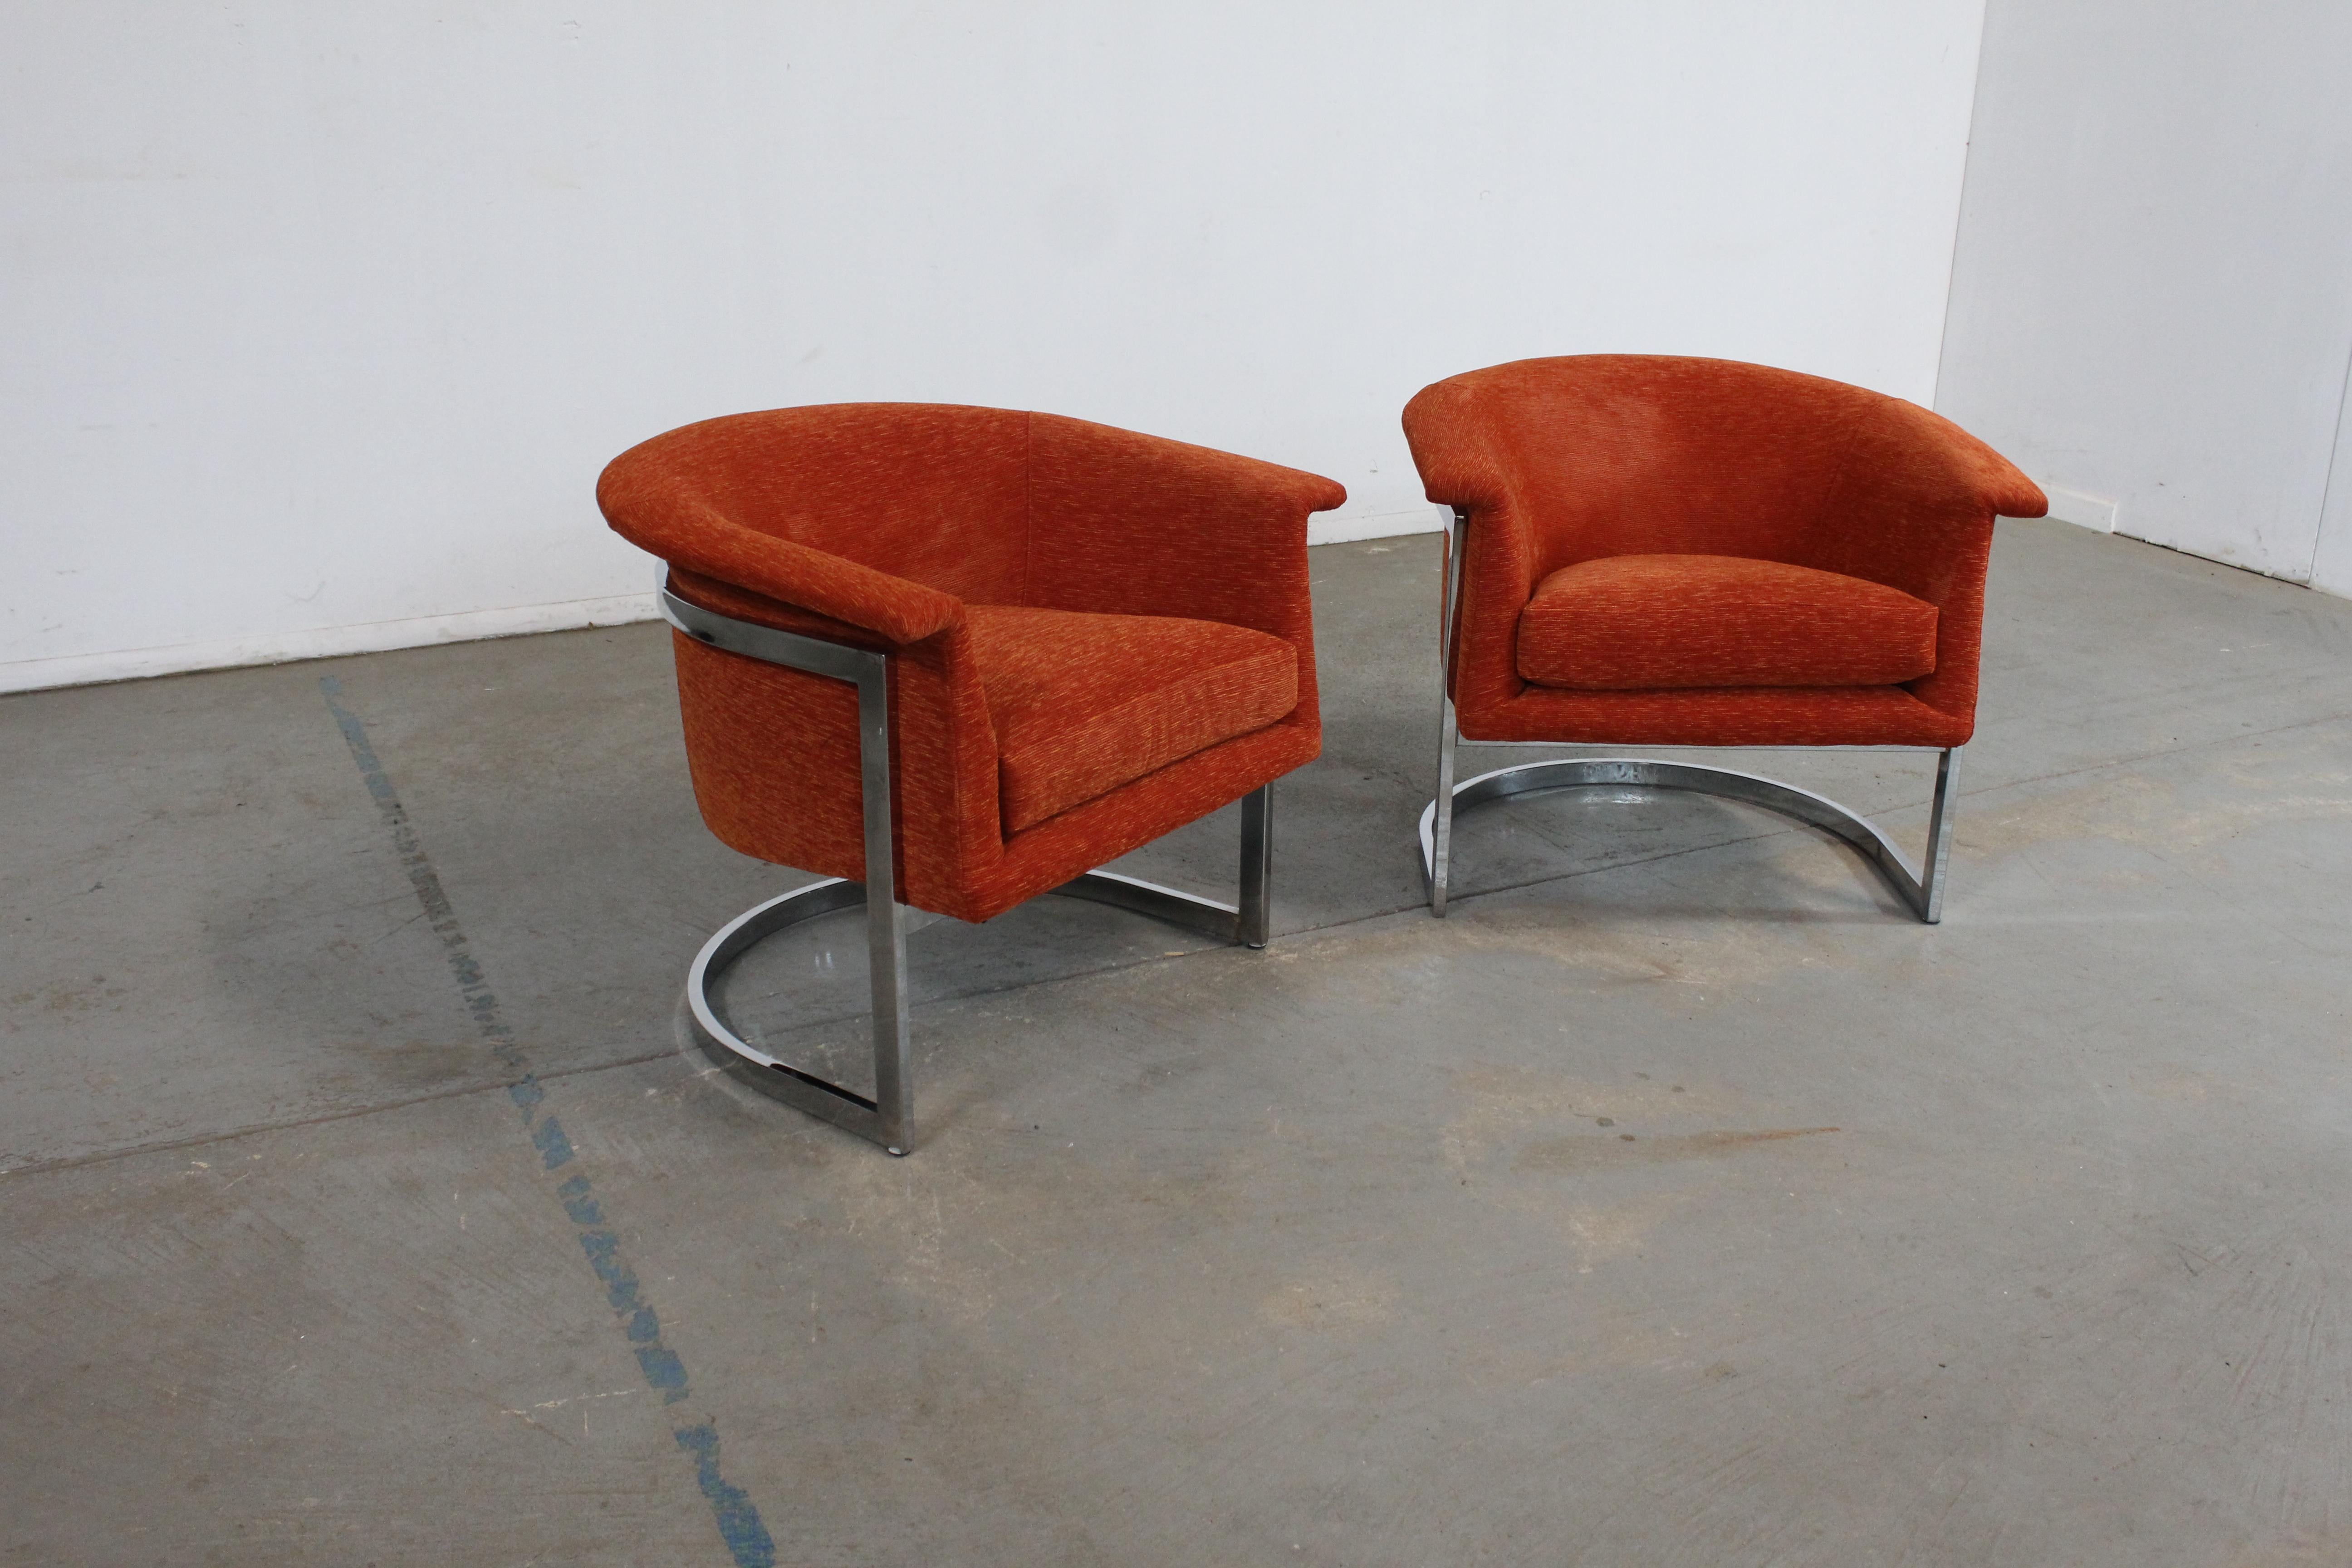 Pair of Mid-Century Modern Craft Associates Chrome Barrel Back Club Chairs

Offered is a pair of beautifully restored vintage Mid-Century Modern chairs by Craft Associates. Designed by the Adrian Pearsall this pair captures the essence of the 1960's